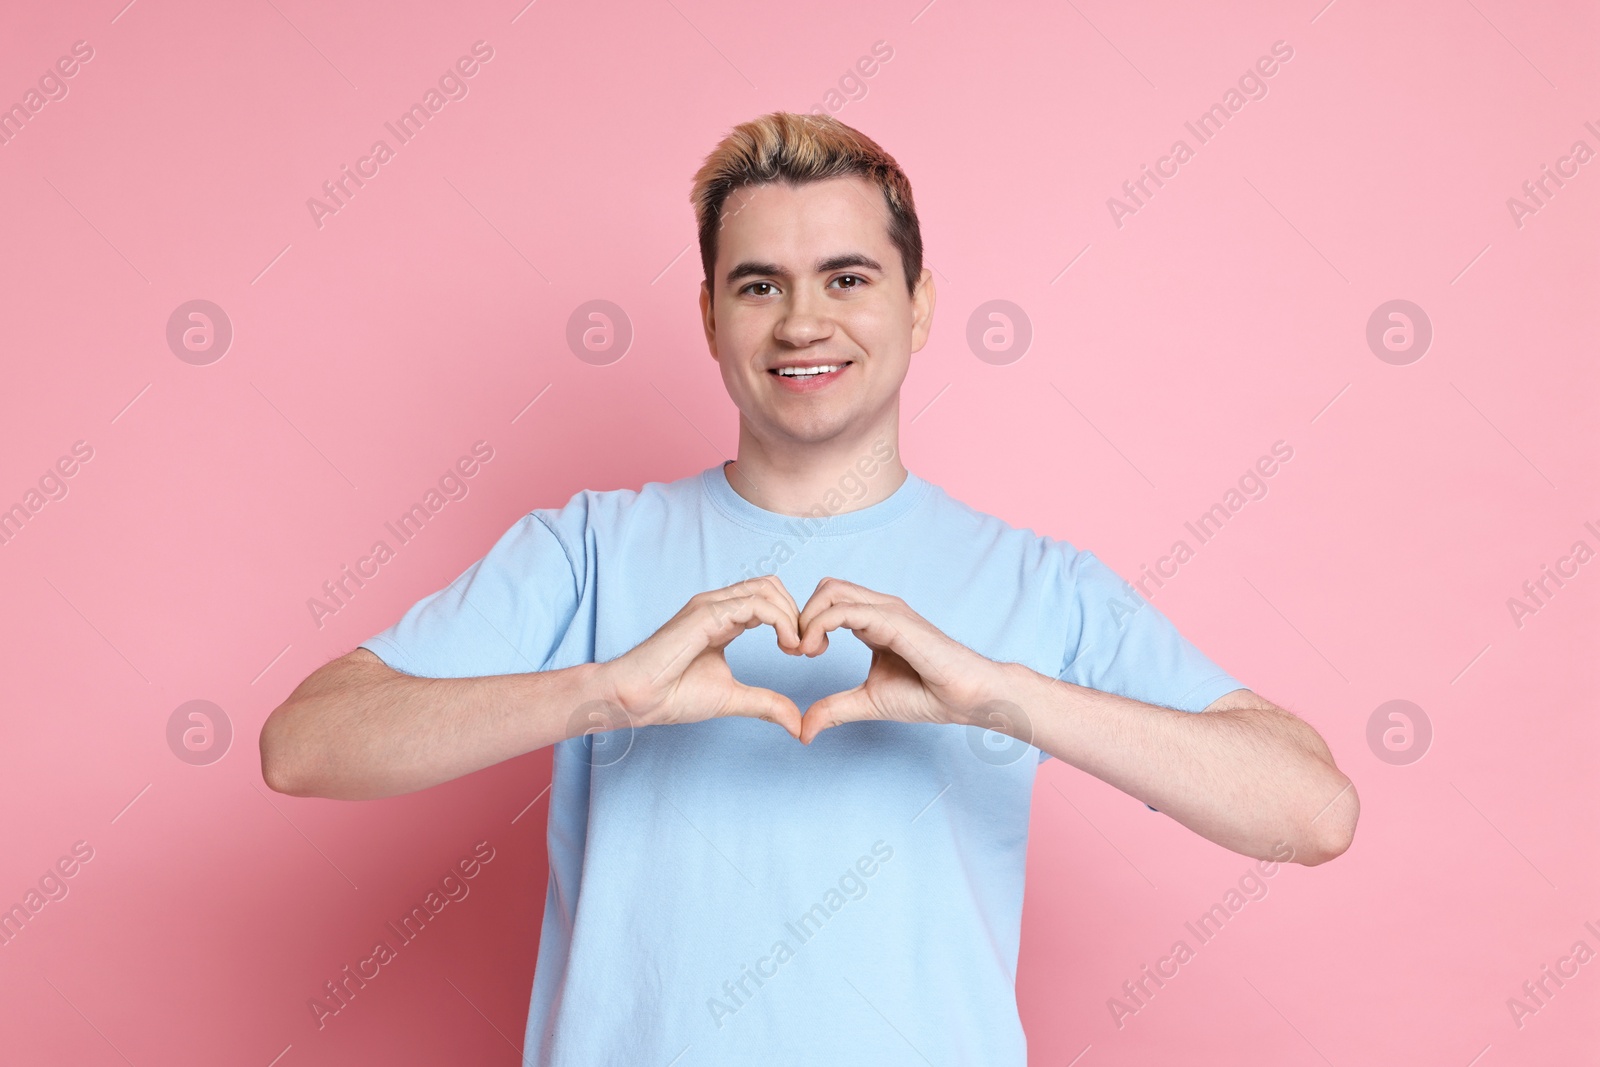 Photo of Young man showing heart gesture with hands on pink background